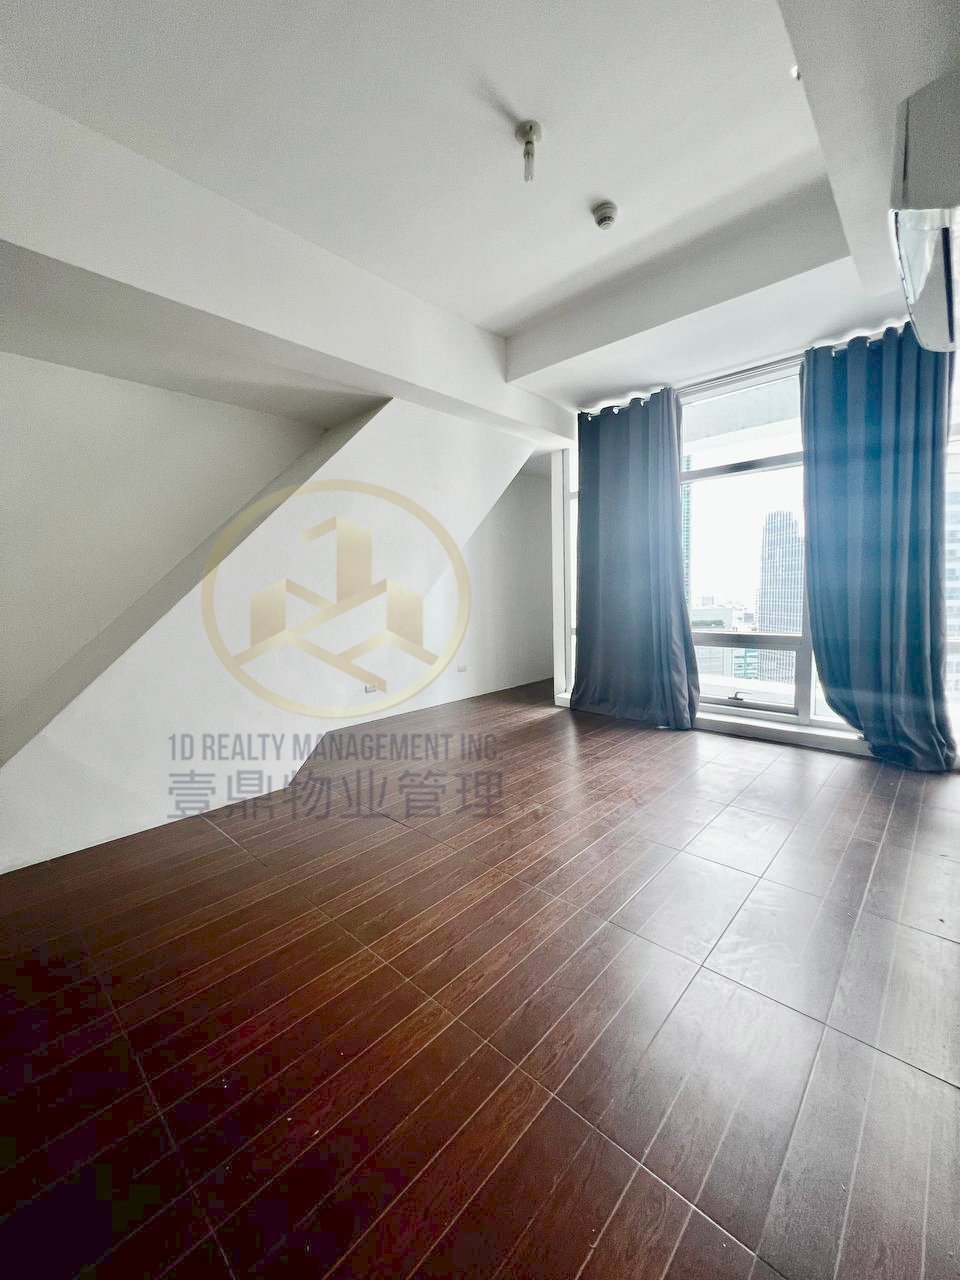 FOR LEASE PENTHOUSE 2BR - The Stratosphere - Valero, Makati City